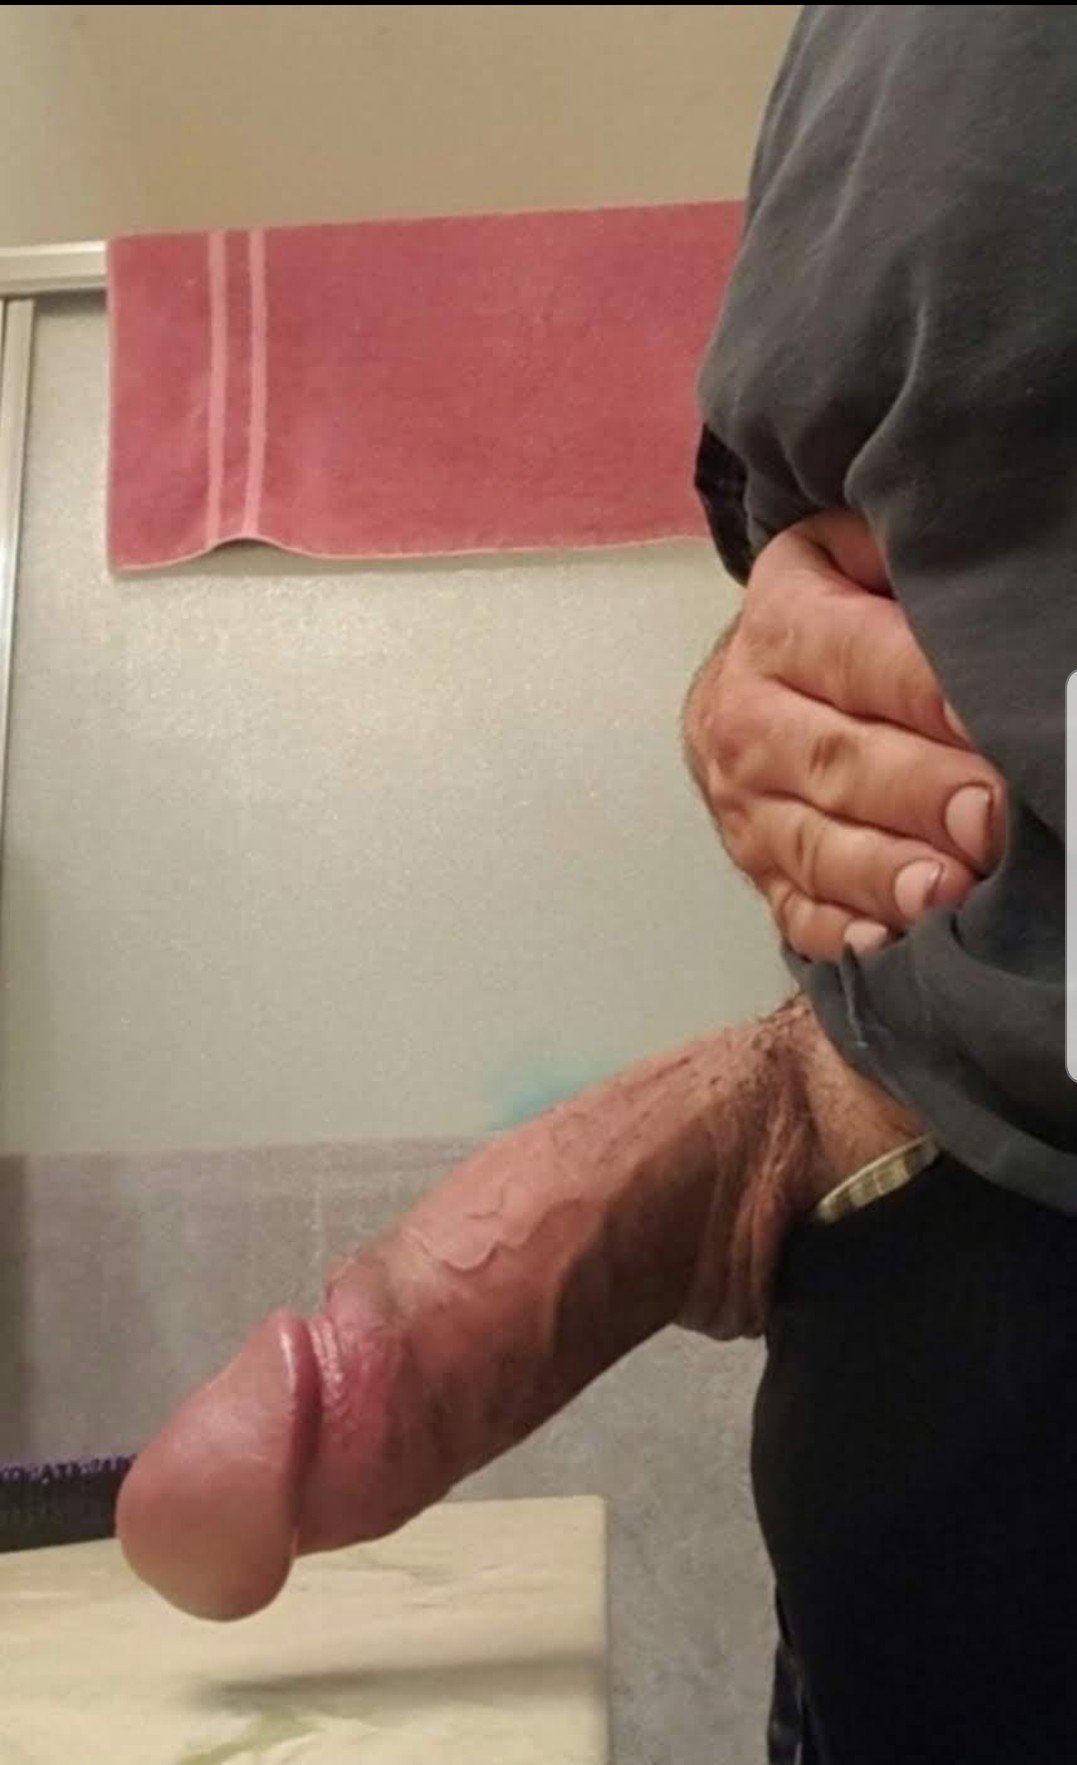 Photo by Rasz67 with the username @Rasz67,  July 12, 2019 at 1:18 AM. The post is about the topic big cocks and the text says '#fatcock #thickdick #cock #big #veiny #bigdick'